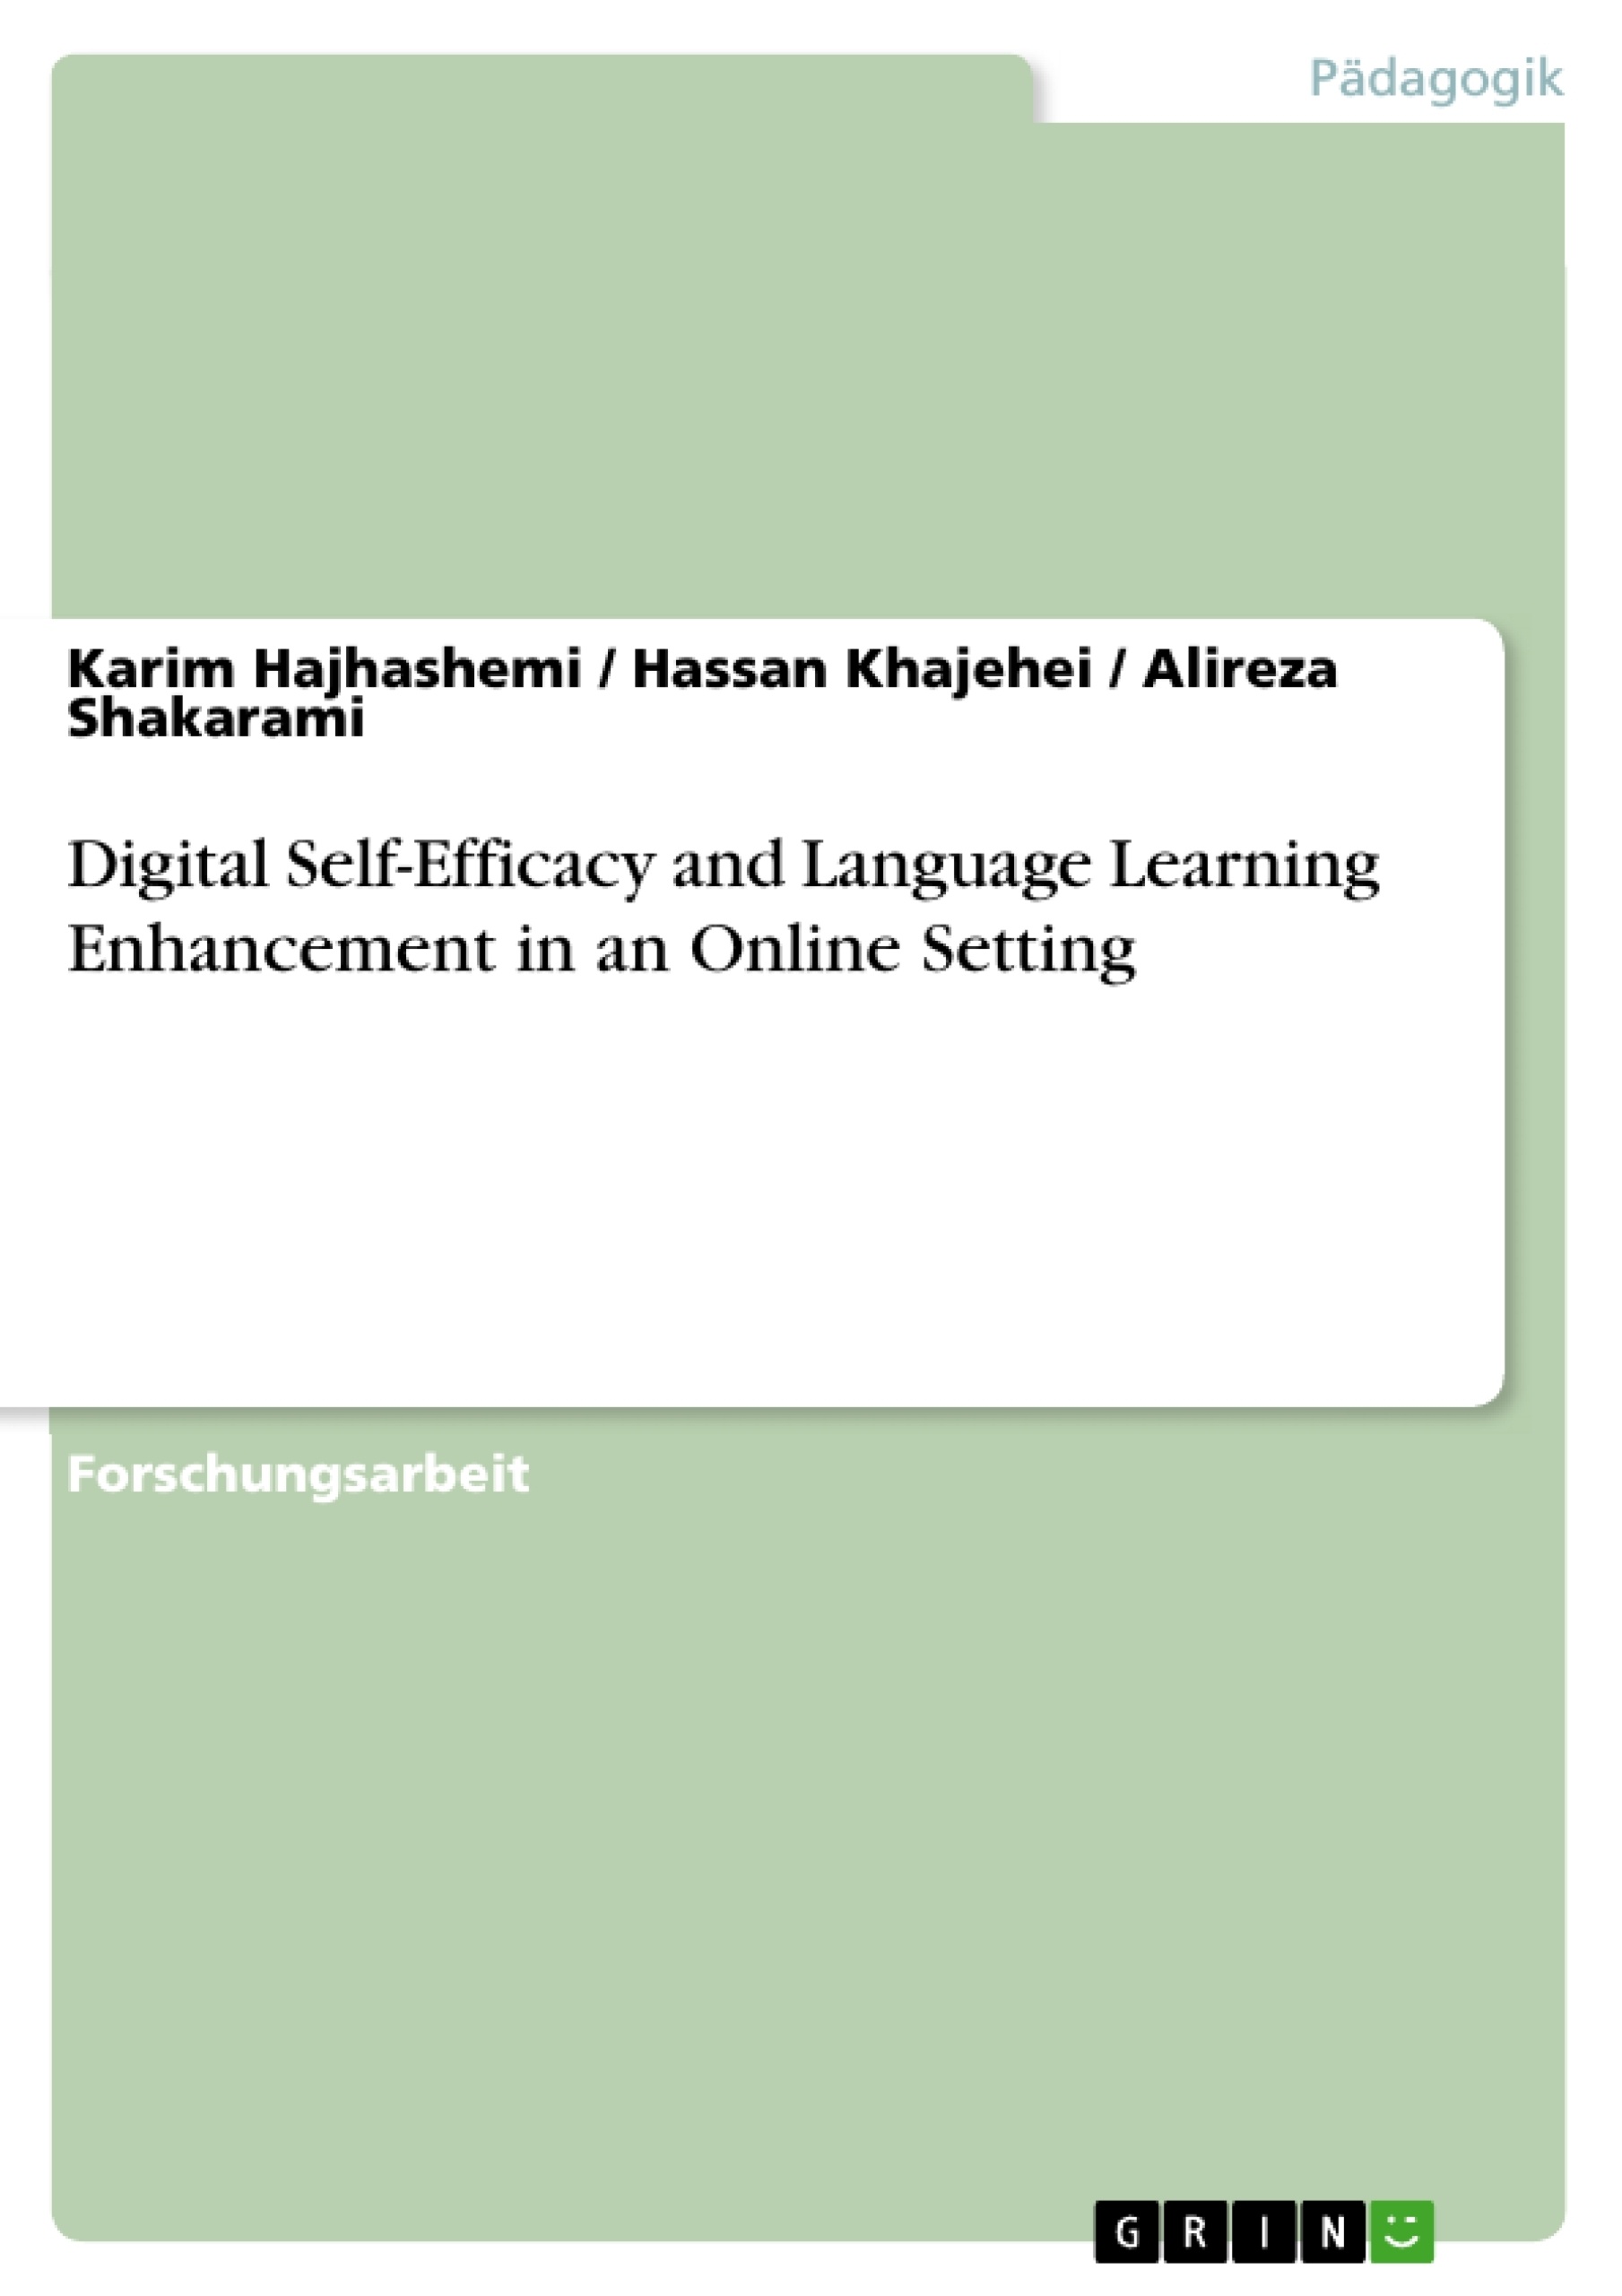 Titel: Digital Self-Efficacy and Language Learning Enhancement in an Online Setting